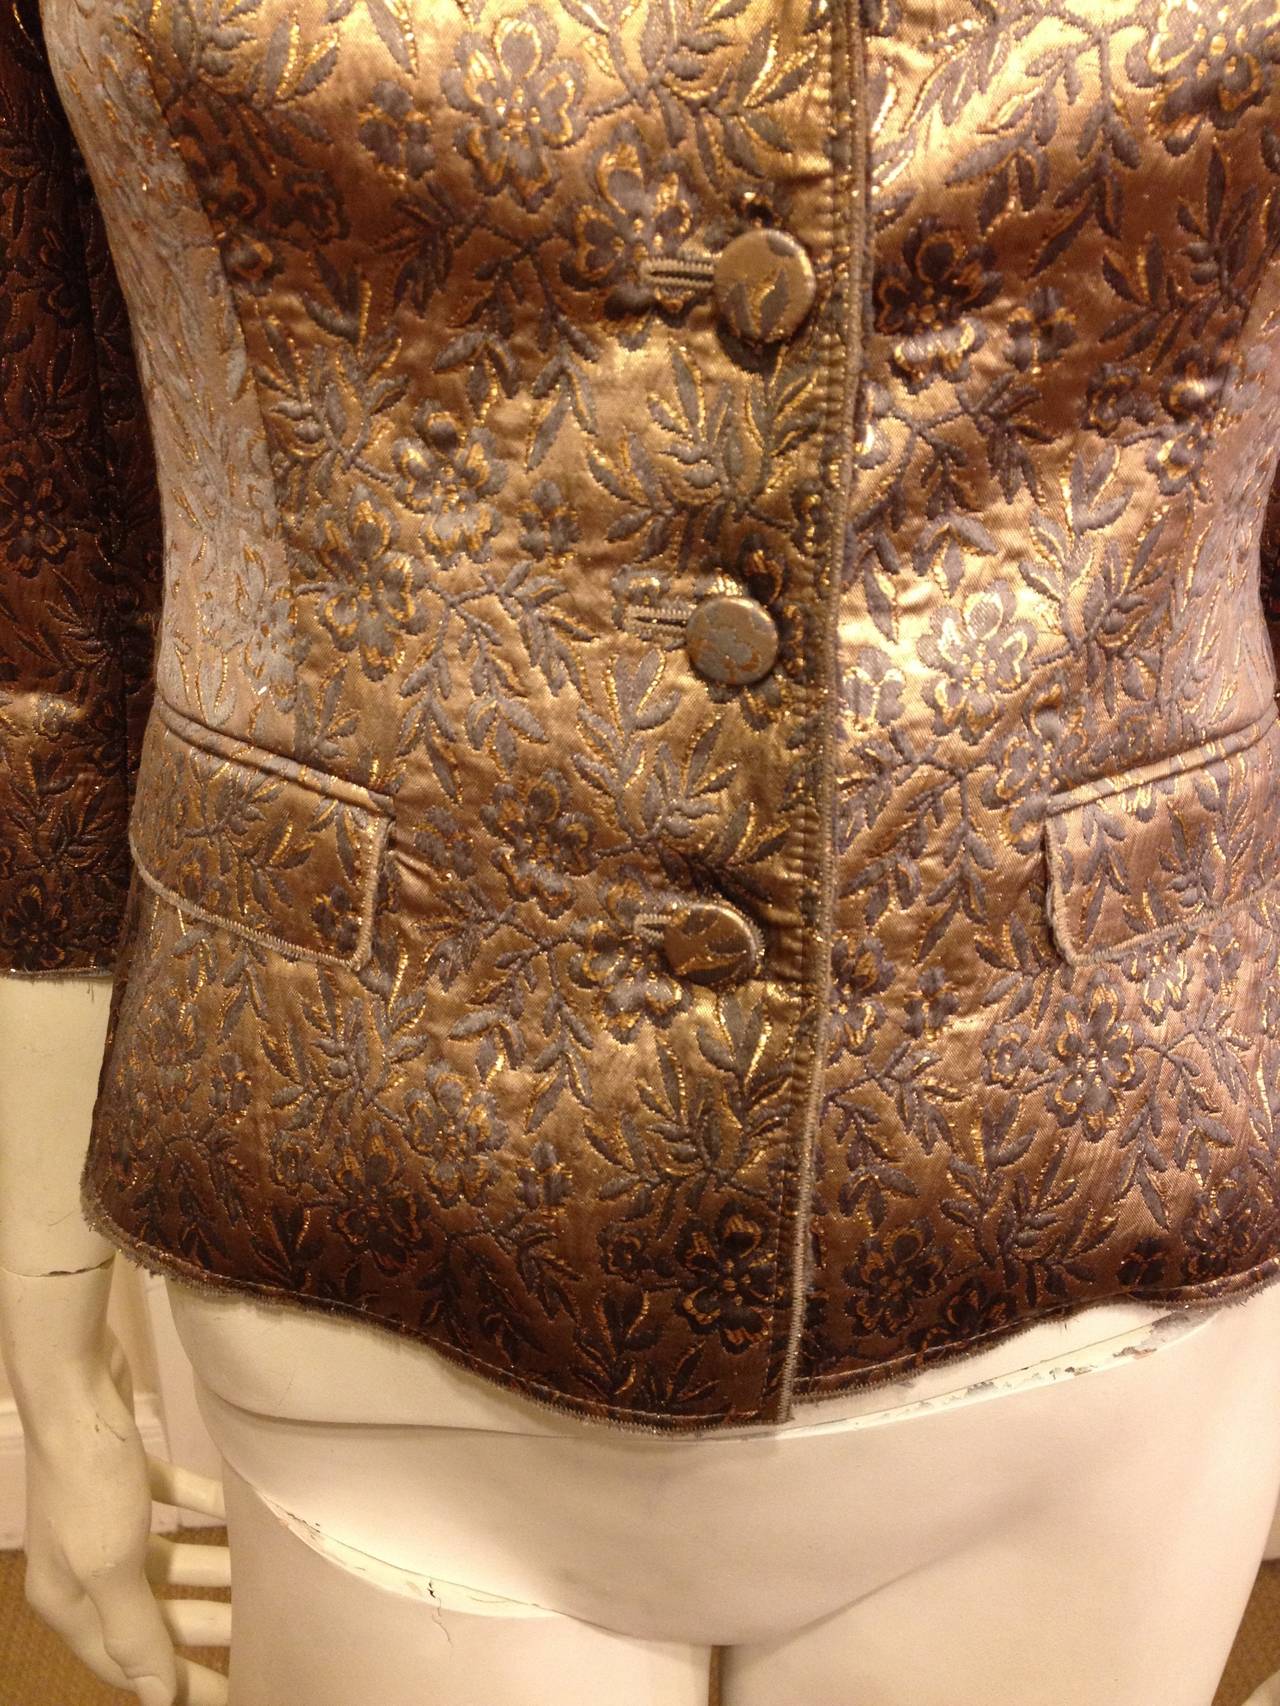 Glimmering, elegant, and fabulous - this jacket is the perfect way to finish any look. In a deep toasted bronze brocade with a lively but subtle floral pattern, it's beautiful in a classic way. A jacket so glamorous is always useful - it will be